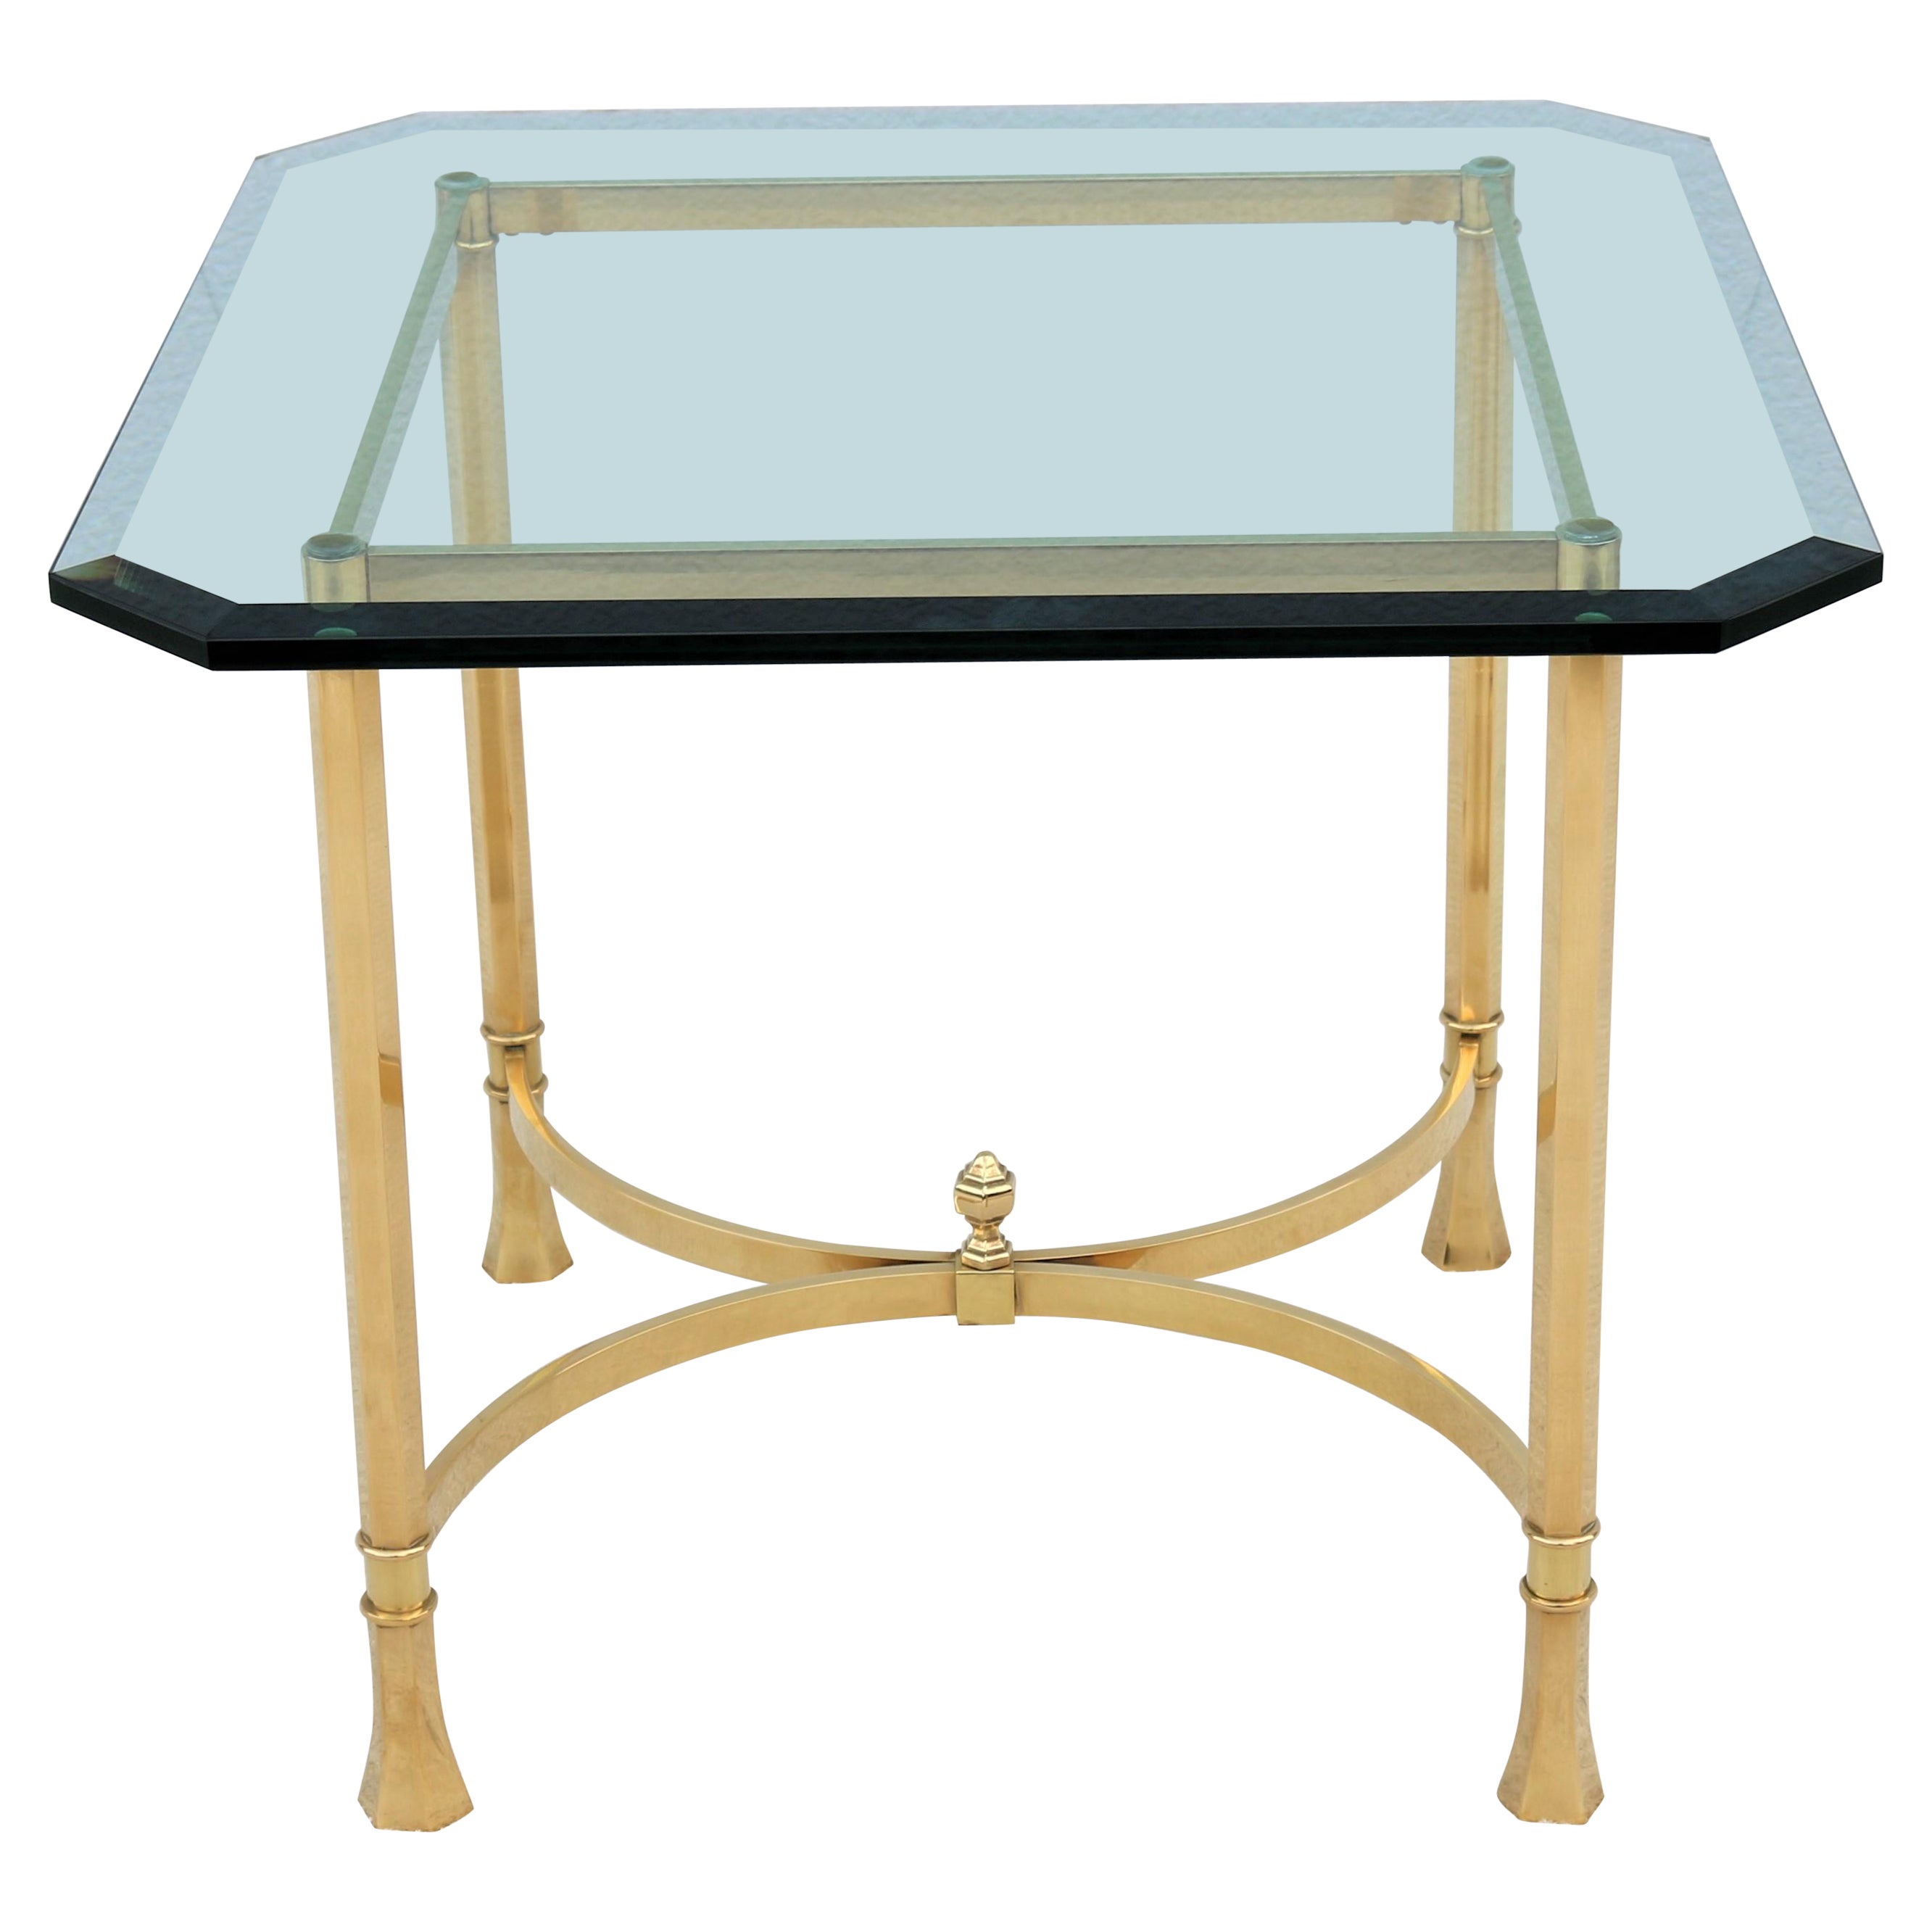 1970s Mid-Century Italian Maison Bagues Style Brass and Glass Square Side Table